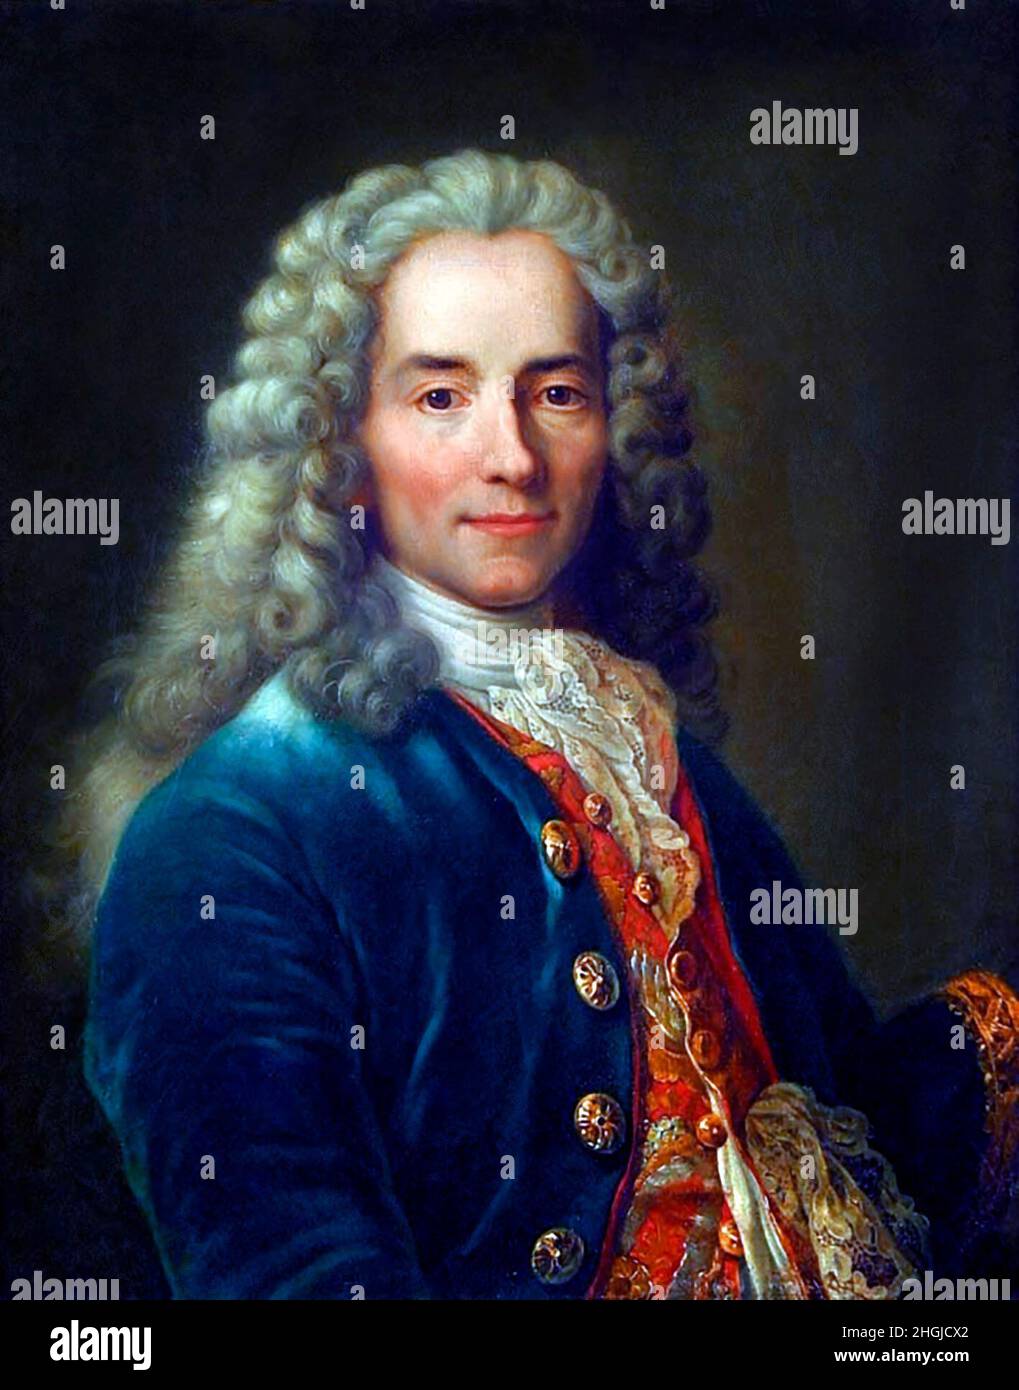 Voltaire (François-Marie Arouet: 1694-1778) portrait by Pierre Gautherot, oil on canvas Stock Photo